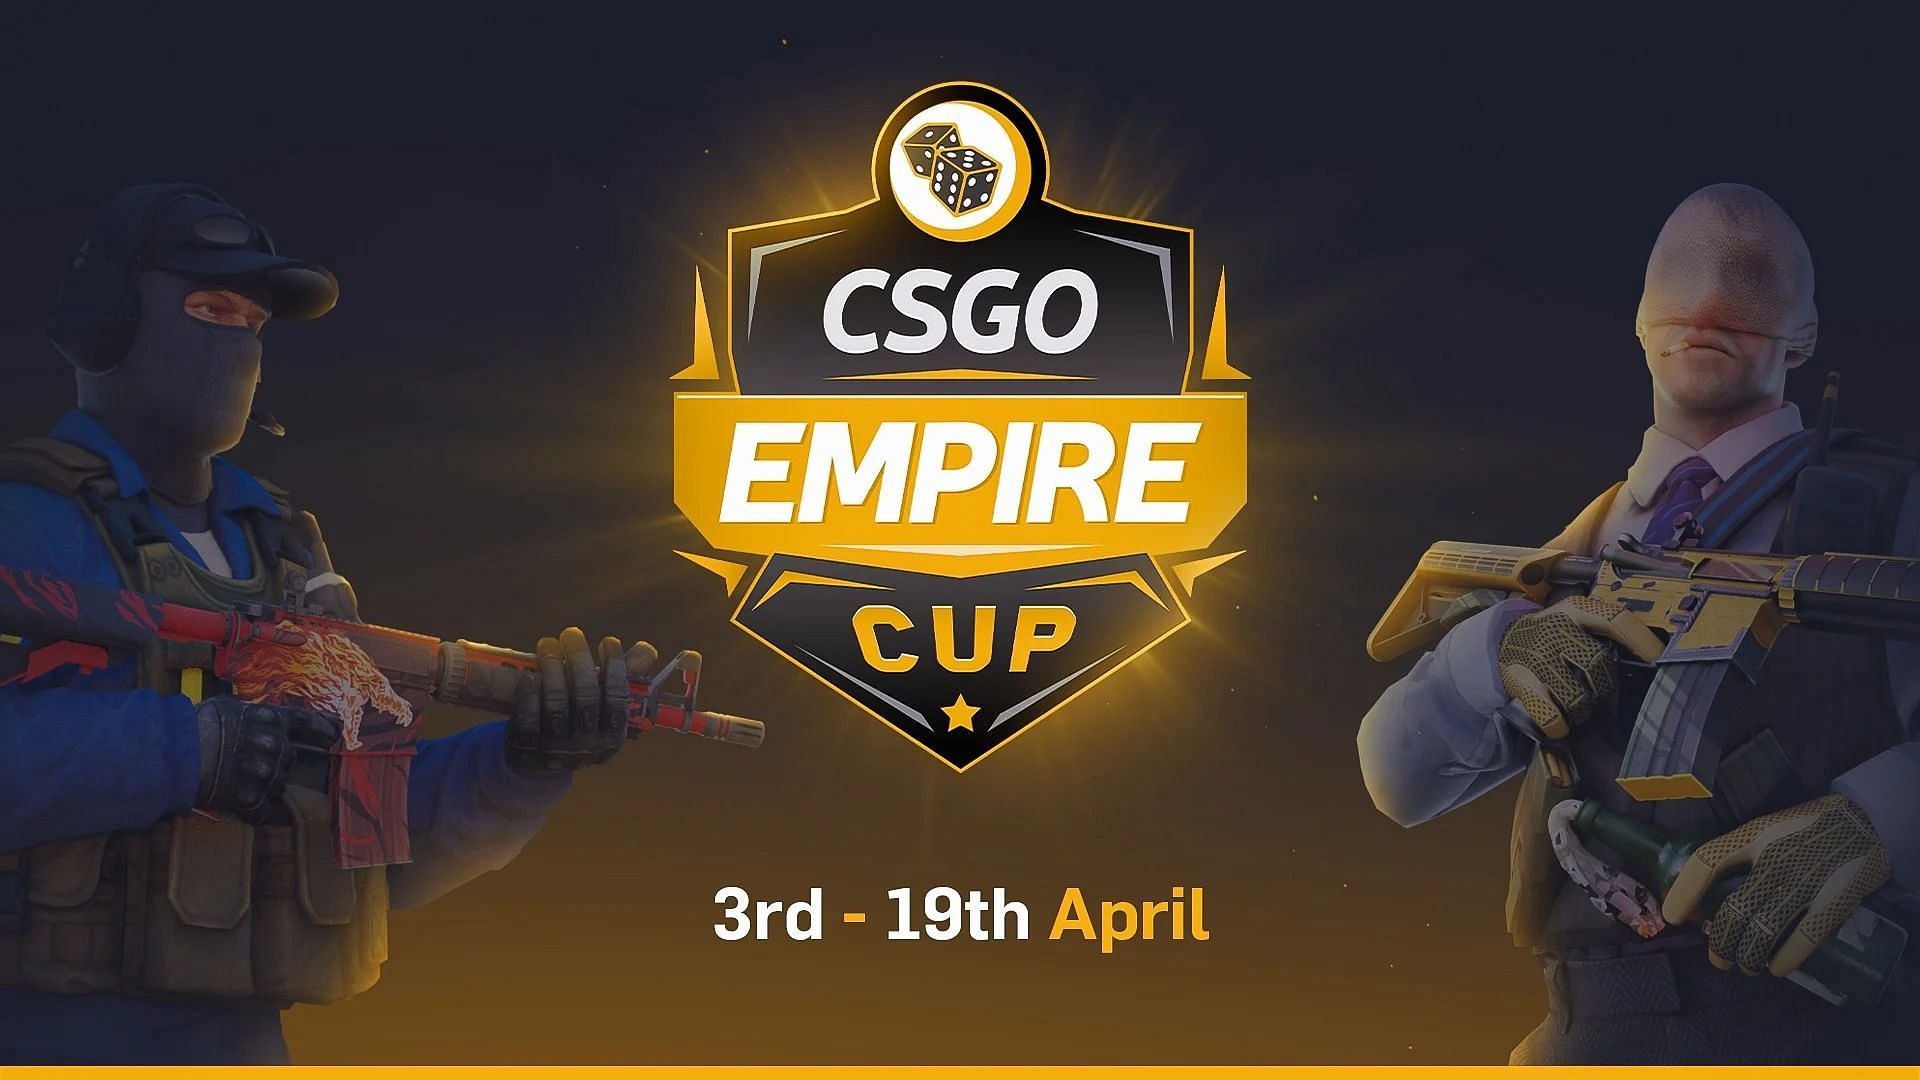 CSGOEmpire Cup got cancelled as Fotuna cuts ties with them (Image via HLTV)